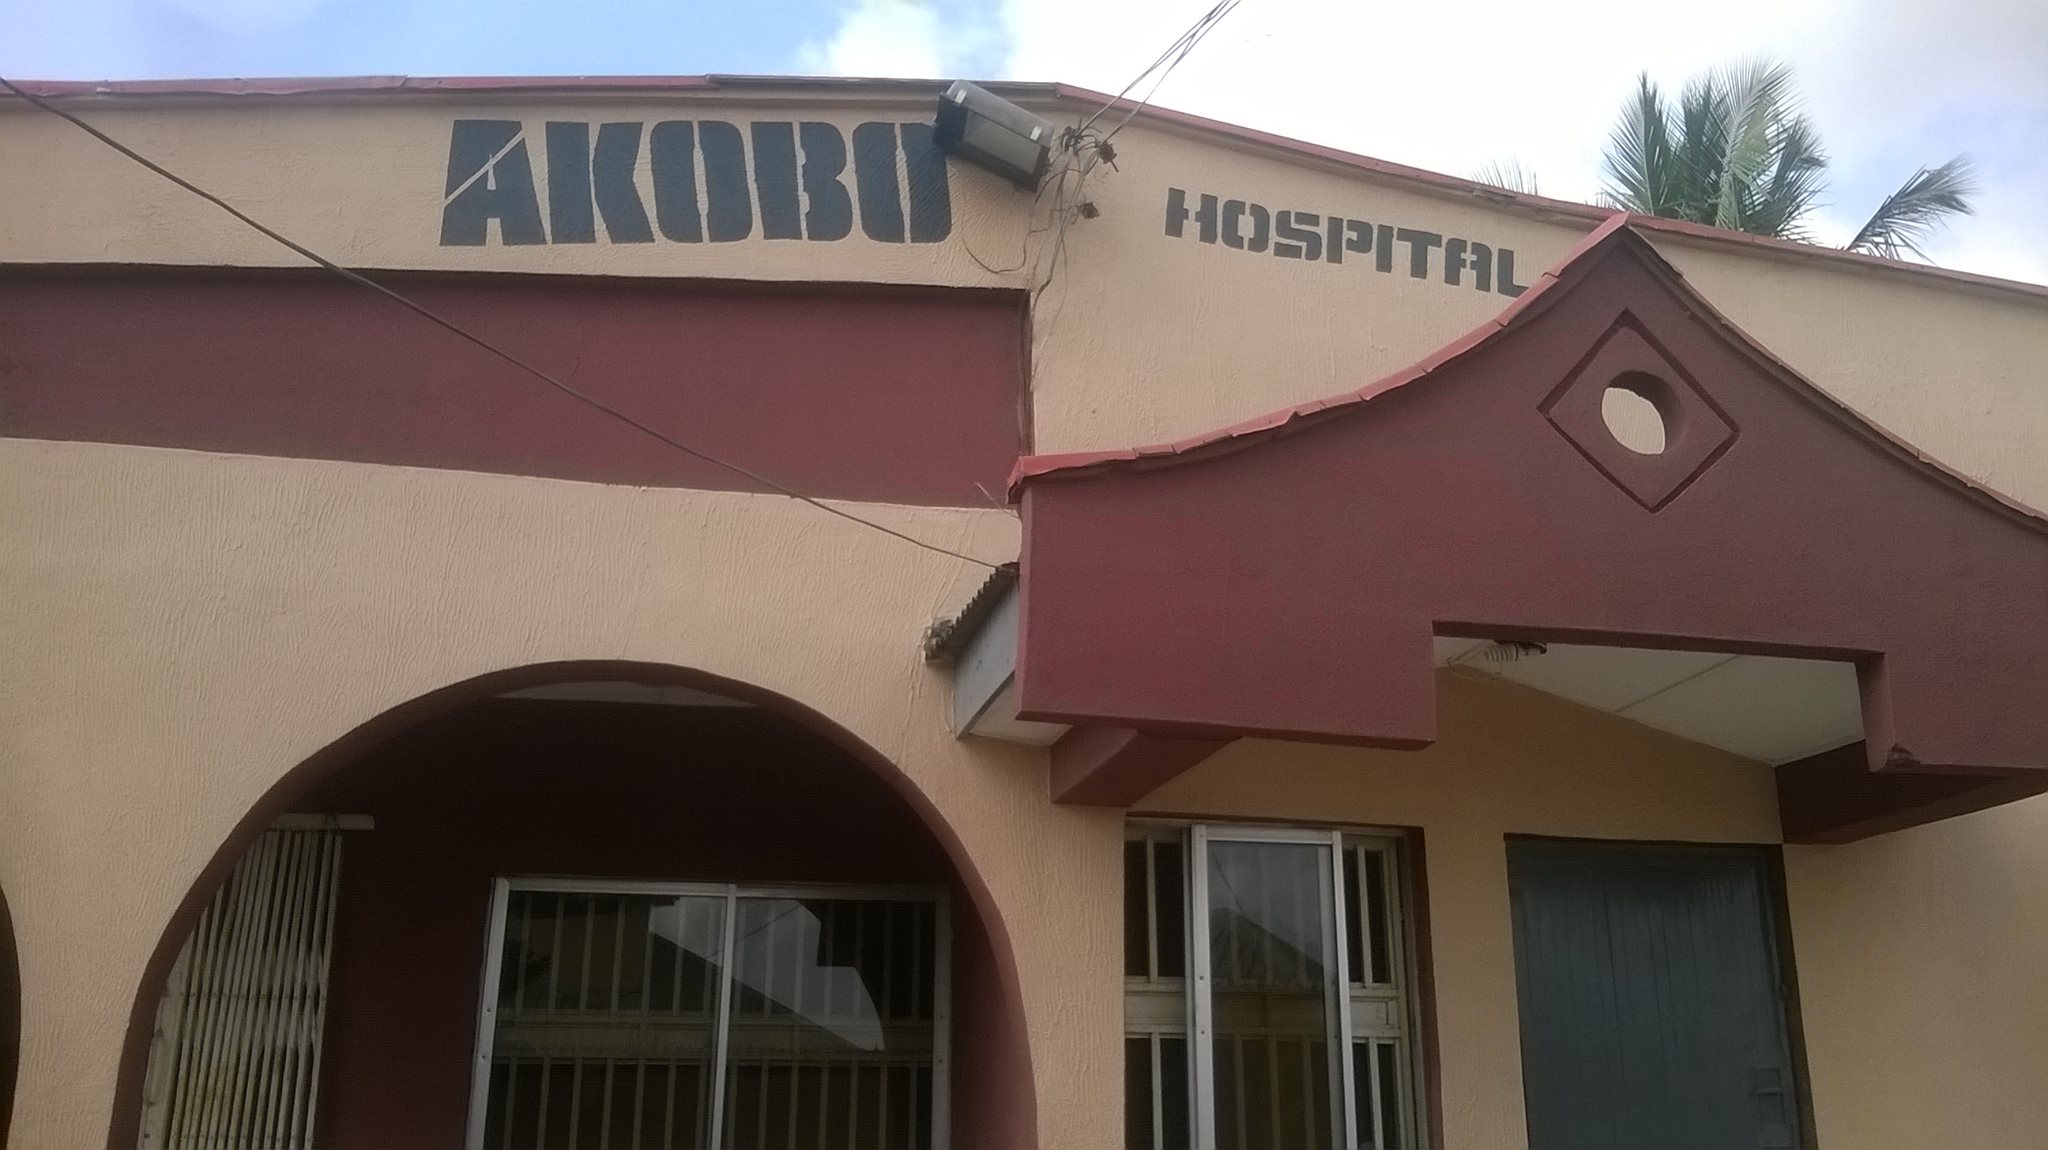 4 children died, 7 hospitalized after suspected food poisoning in Akobo County